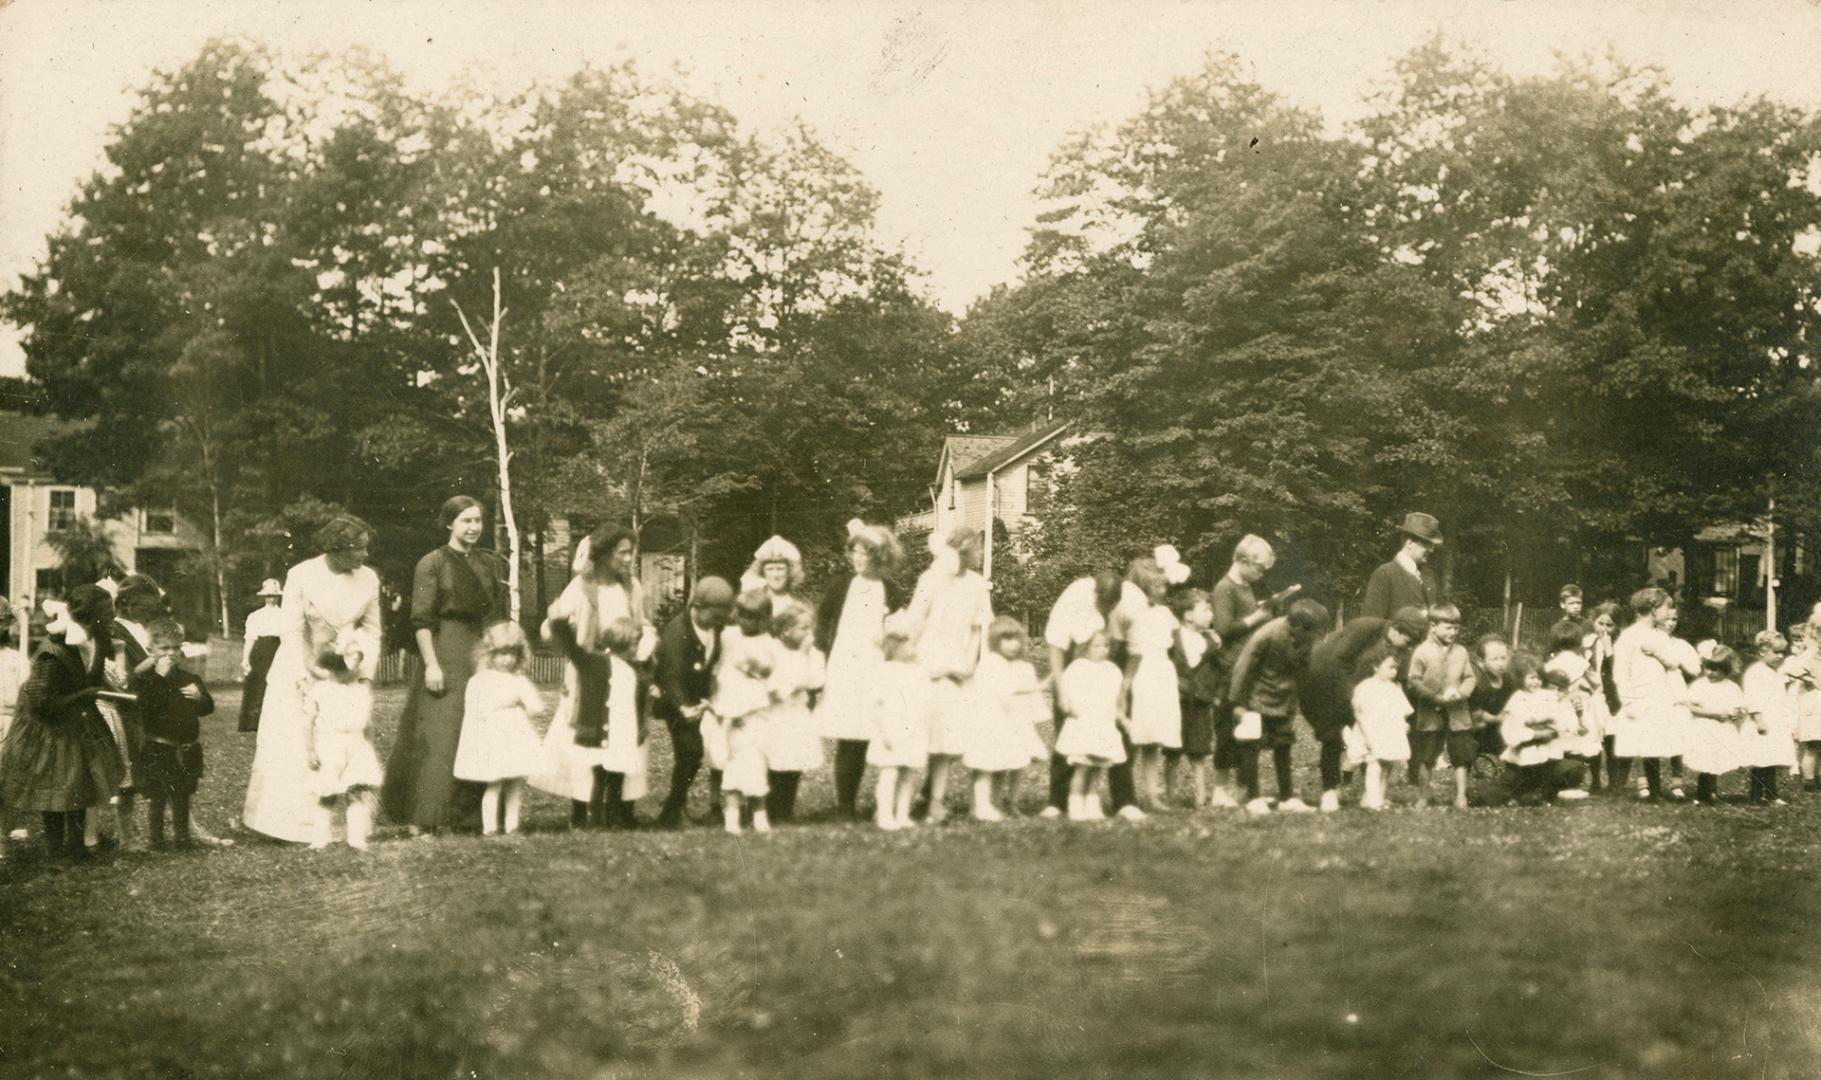 Civic Holiday Race - Kew Gardens about 1911